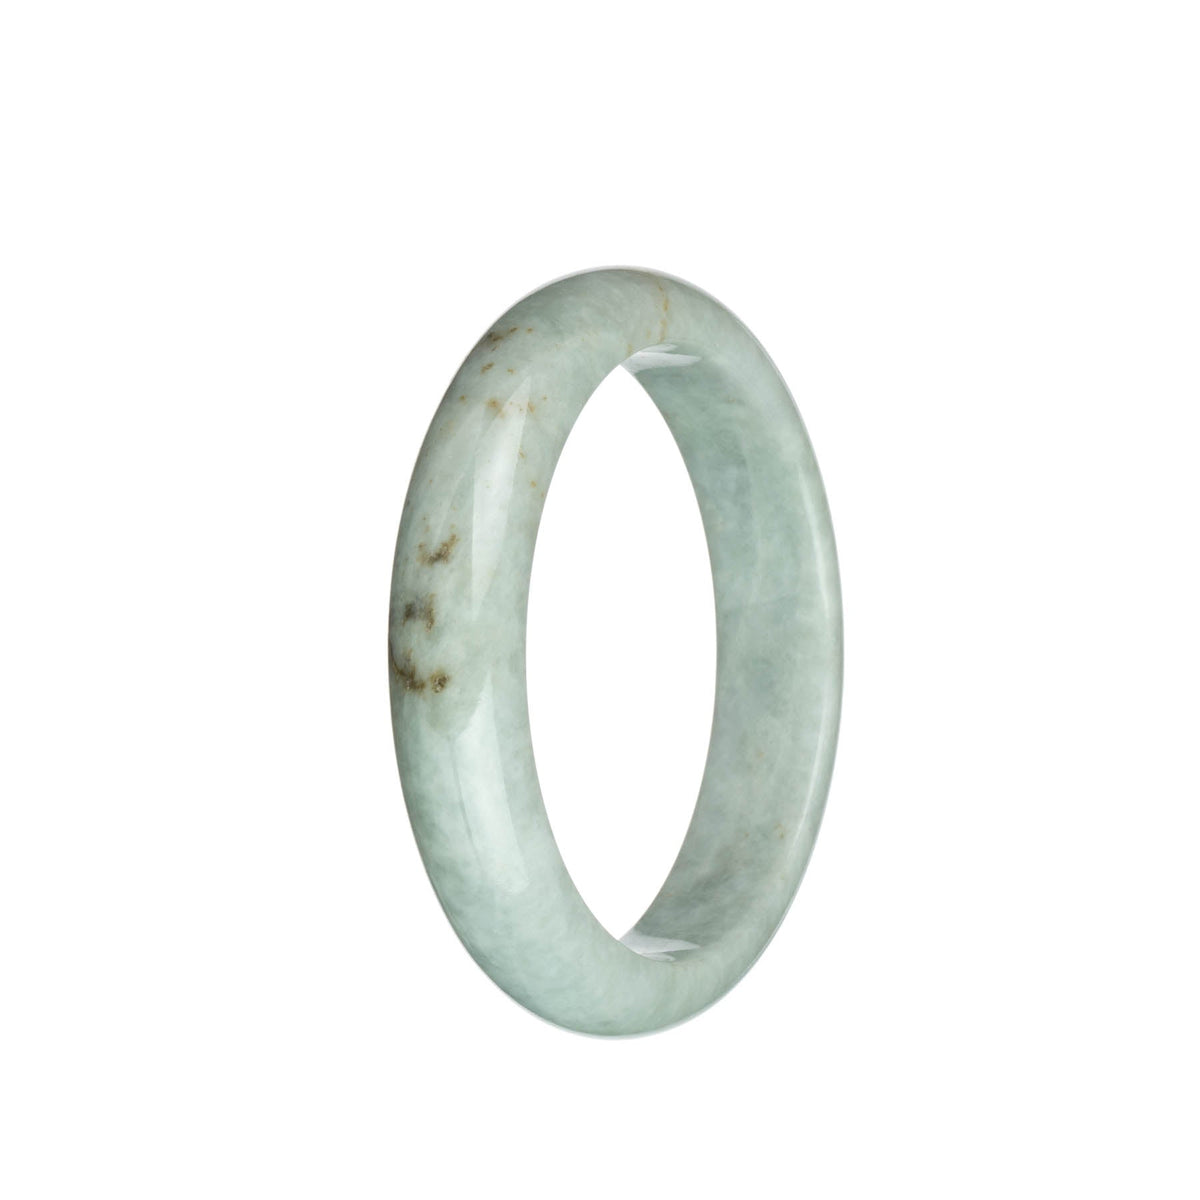 A light grey traditional jade bracelet with a half moon design, measuring 59mm. Certified Grade A.